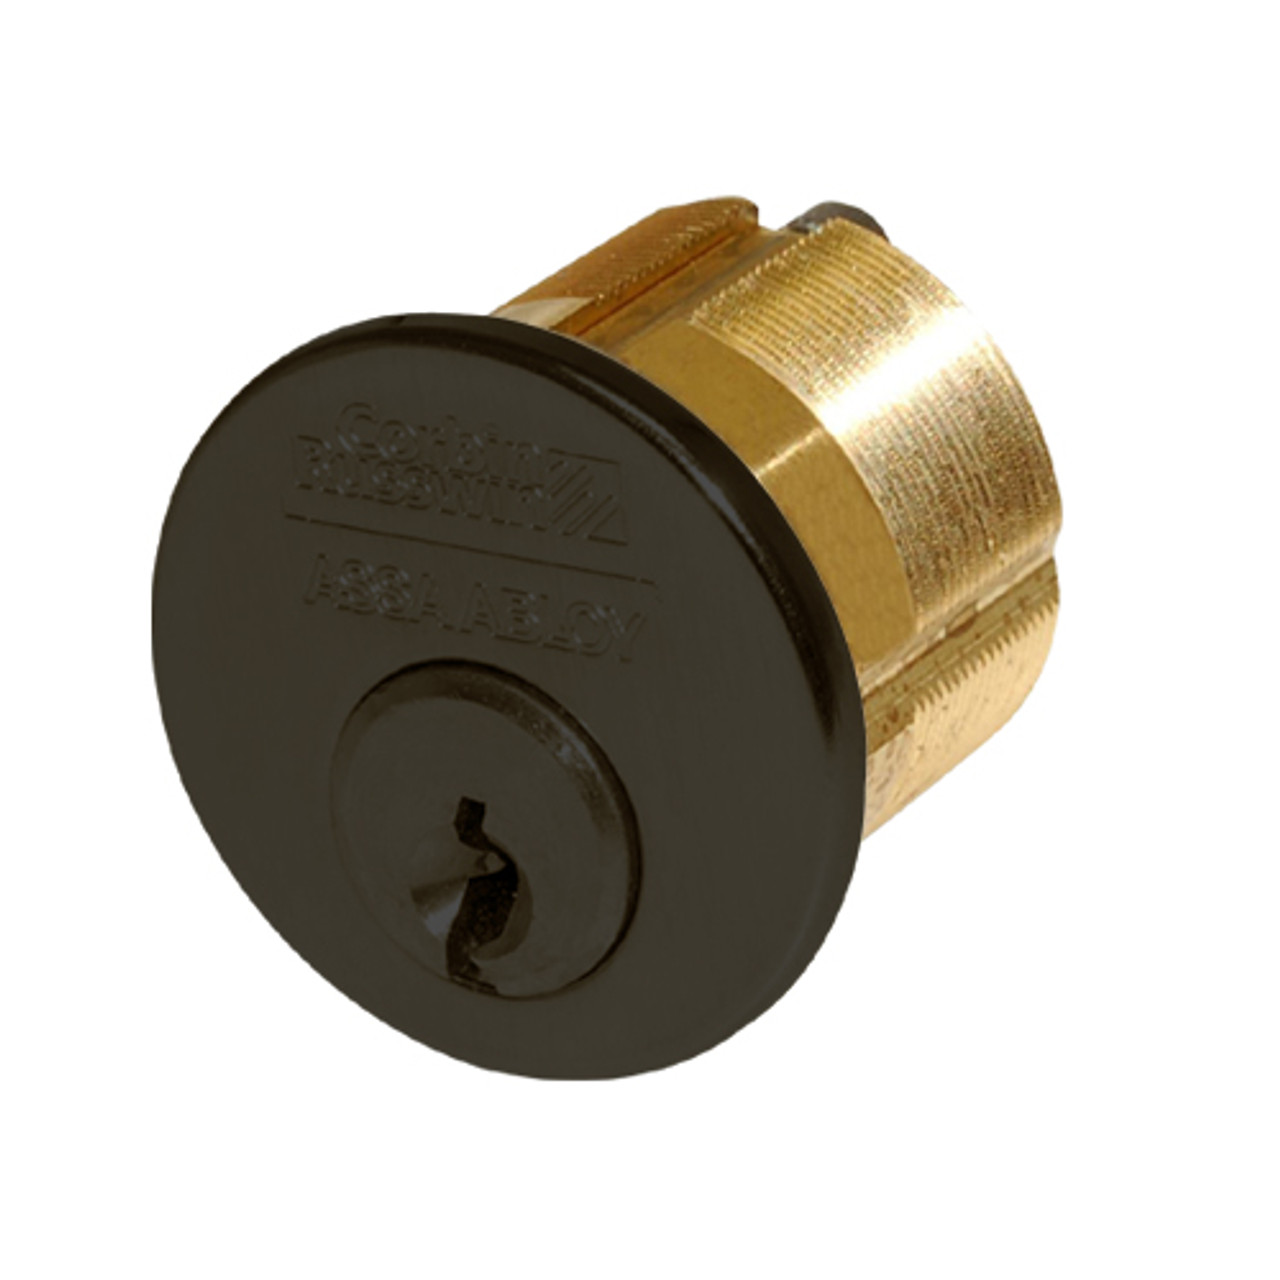 CR1000-138-A06-6-H4-613 Corbin Conventional Mortise Cylinder for Mortise Lock and DL3000 Deadlocks with Schlage L9000 Cam in Oil Rubbed Bronze Finish